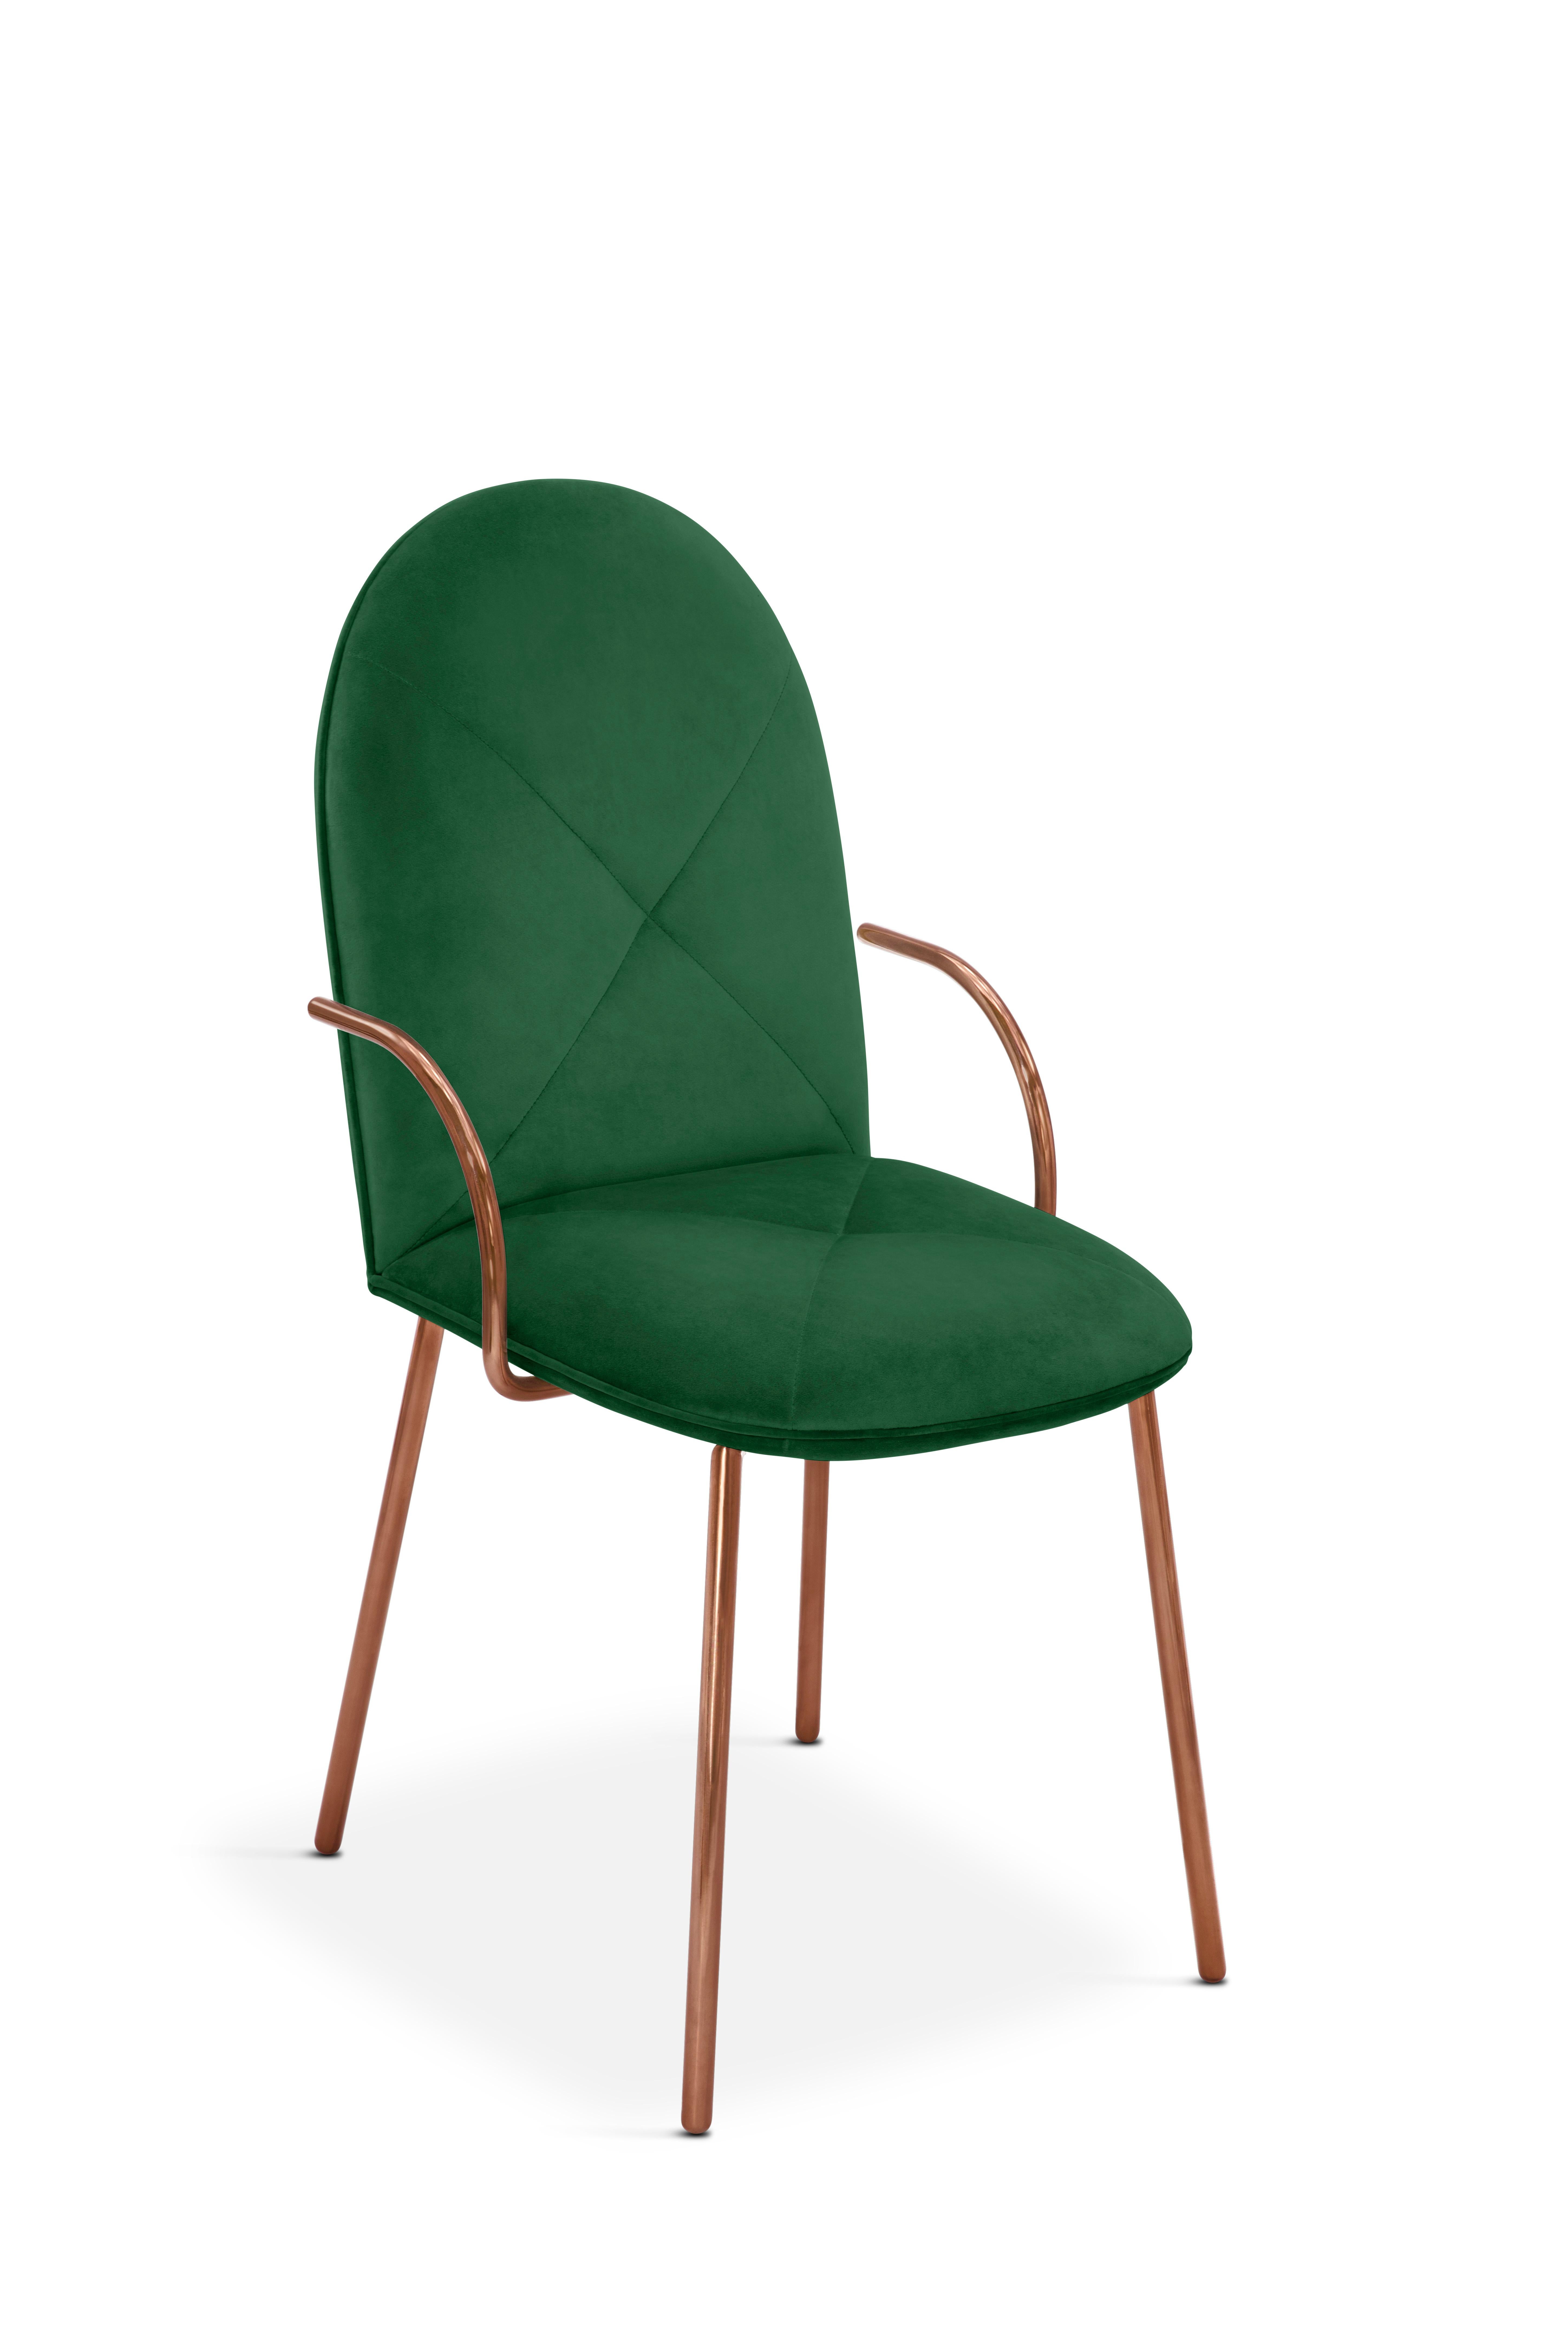 Orion Dining Chair with Plush Green Velvet and Rose Gold Arms by Nika Zupanc is a beautiful chair in rich green velvet with metal legs in rose gold.

Nika Zupanc, a strikingly renowned Slovenian designer, never shies away from redefining the status